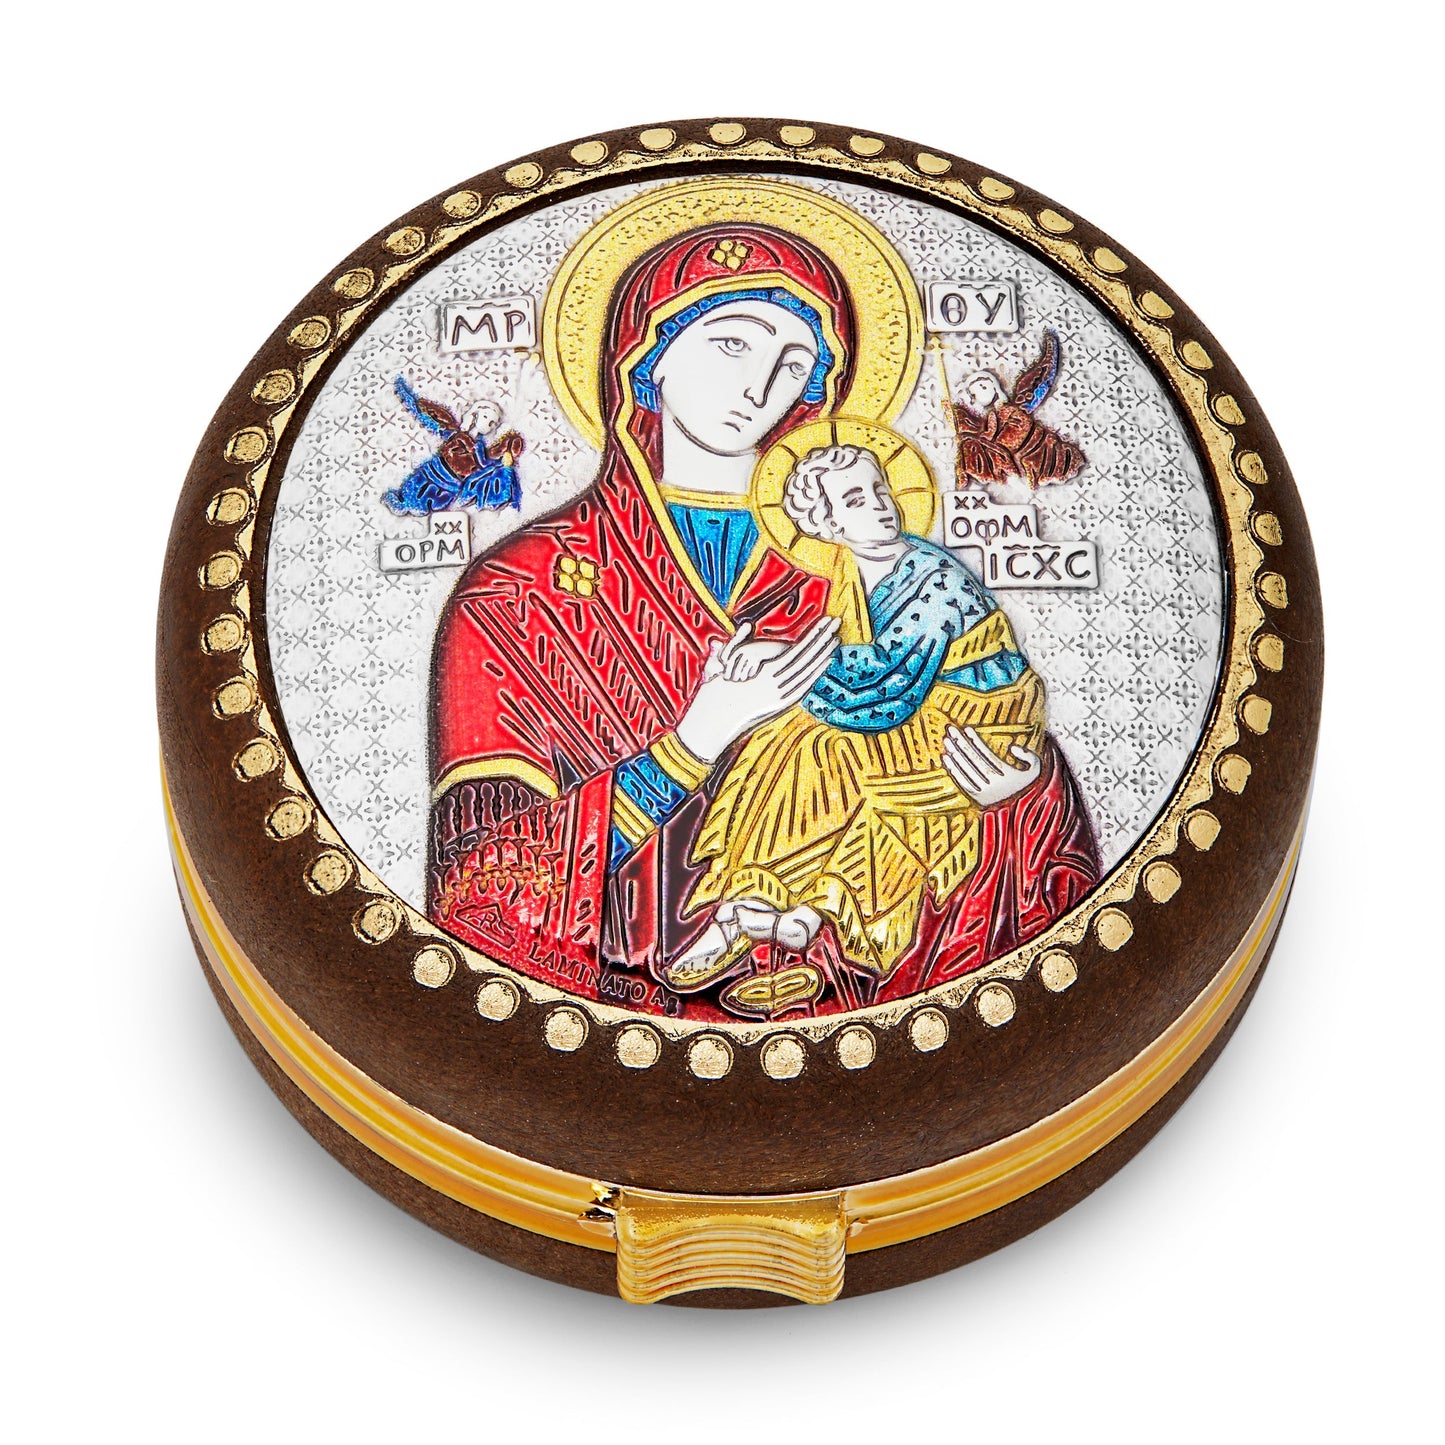 Mondo Cattolico Rosary Box 6 cm (2.36 in) Wooden Rosary Box of Our Lady of Perpetual Help With Metal Plaque and Colorful Details